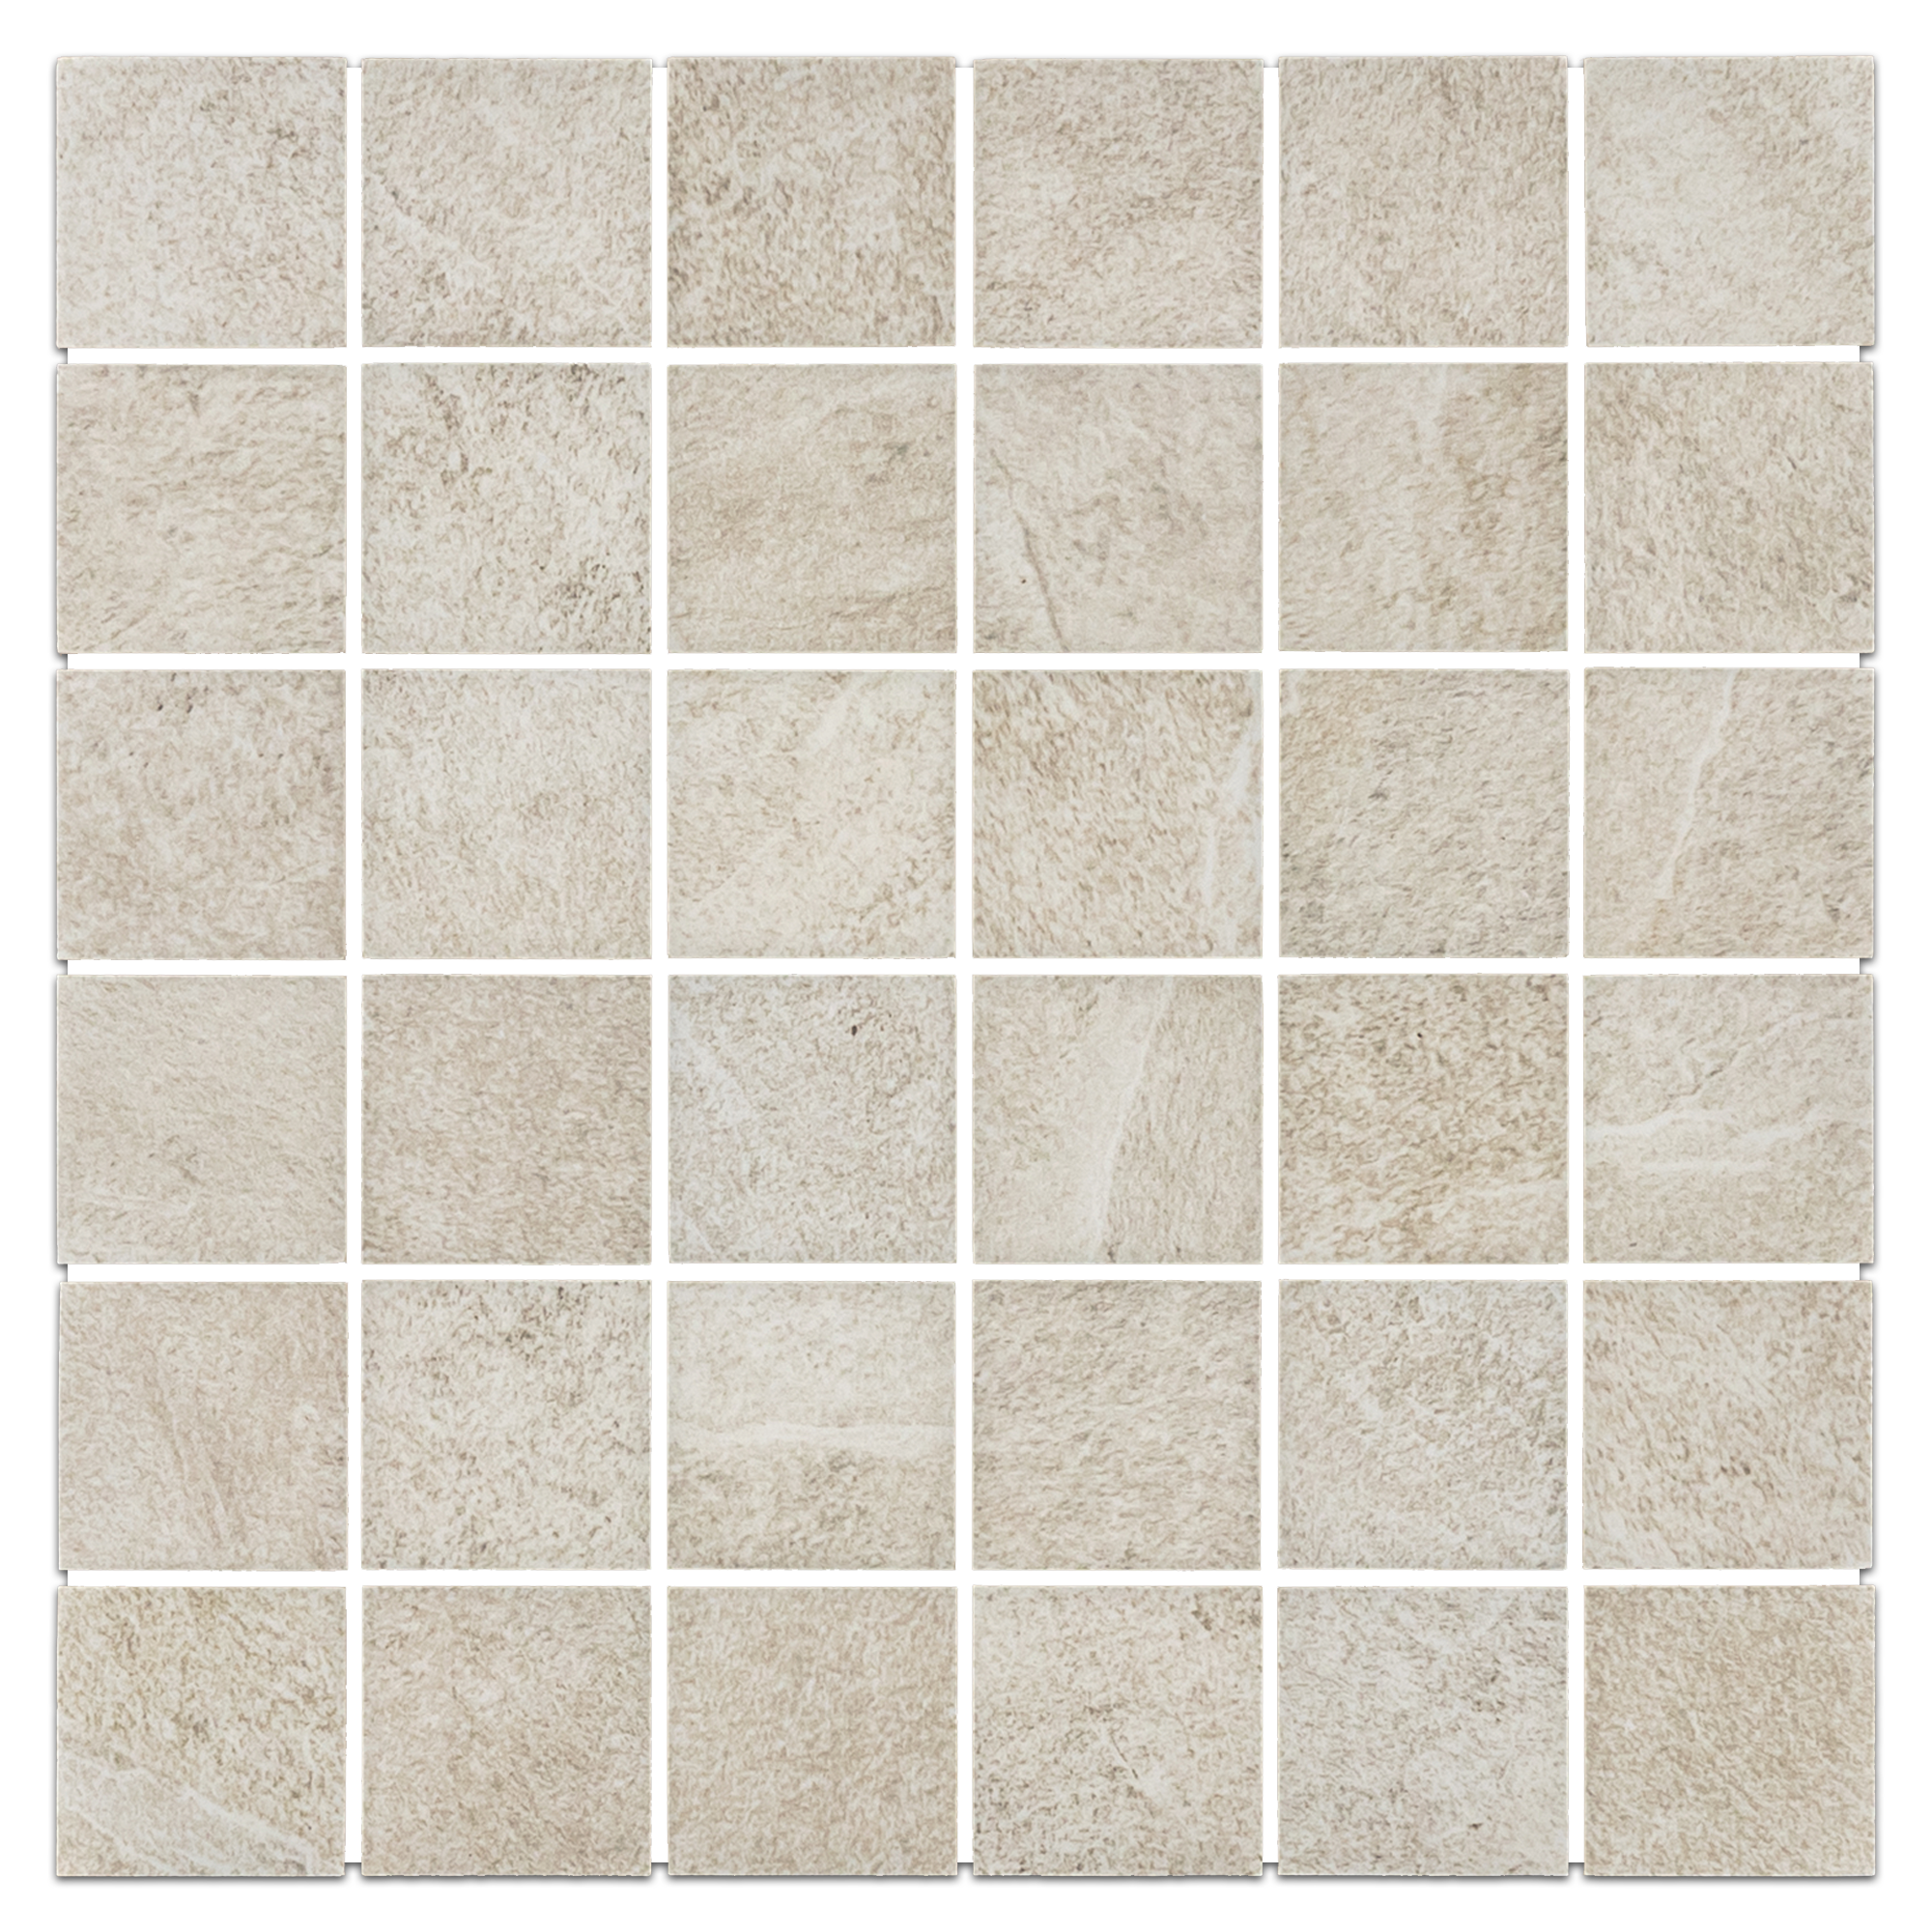 Elon Ecostone Sand Porcelain 2x2 Straight Stack Field Mosaic 12x12x9mm Natural SP114 Surface Group International Product